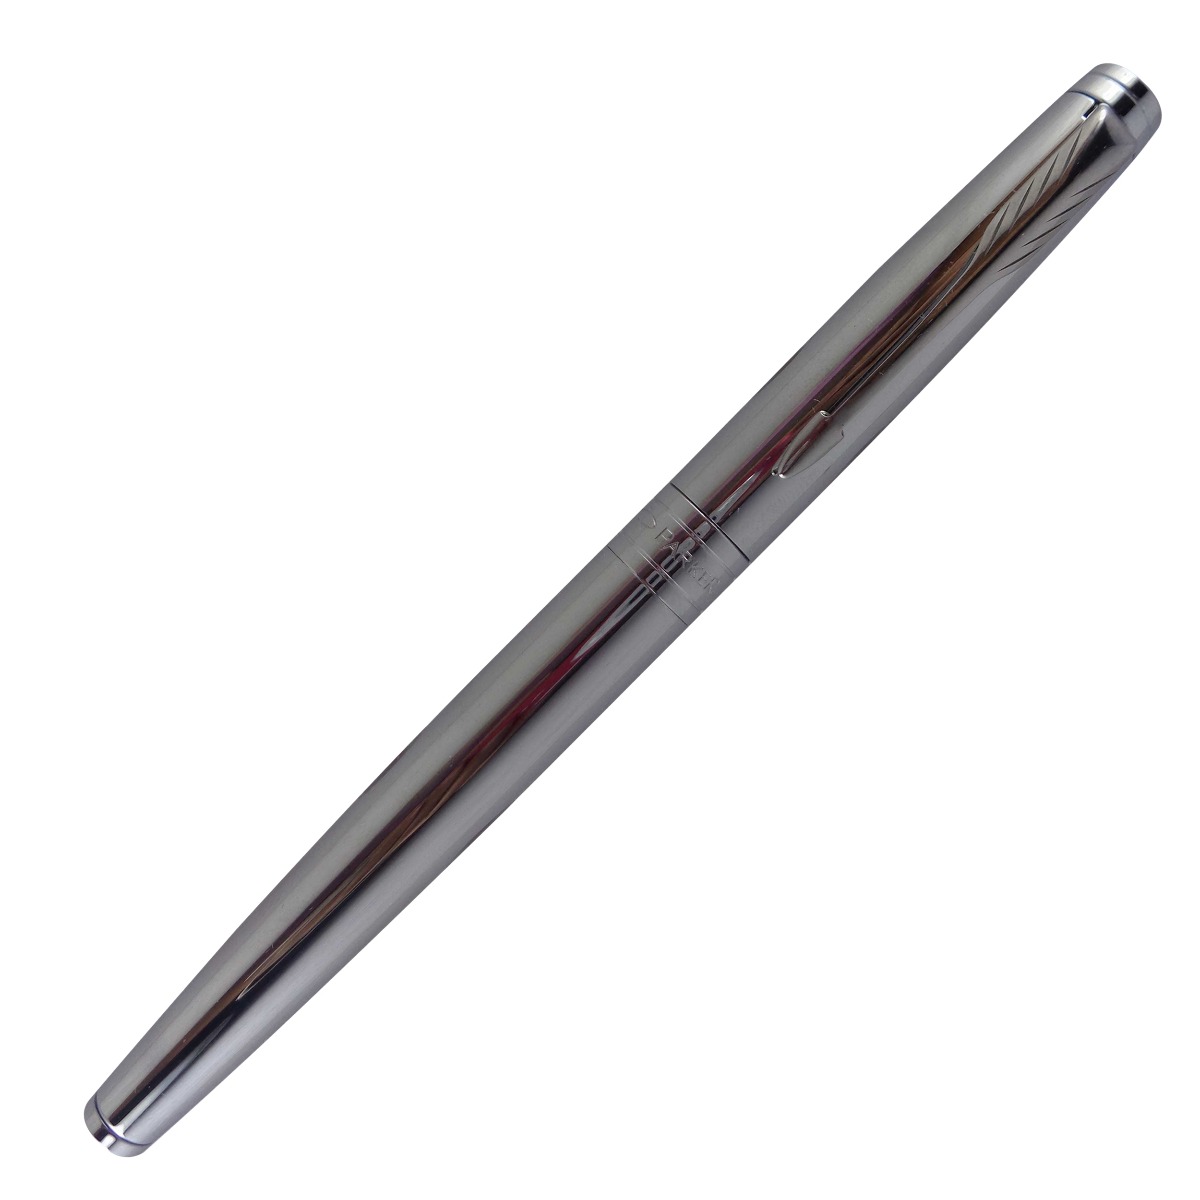 Parker Model: 14909 Aster Shiny Chrome Silver color body with silver clip fine tip cap type roller ball